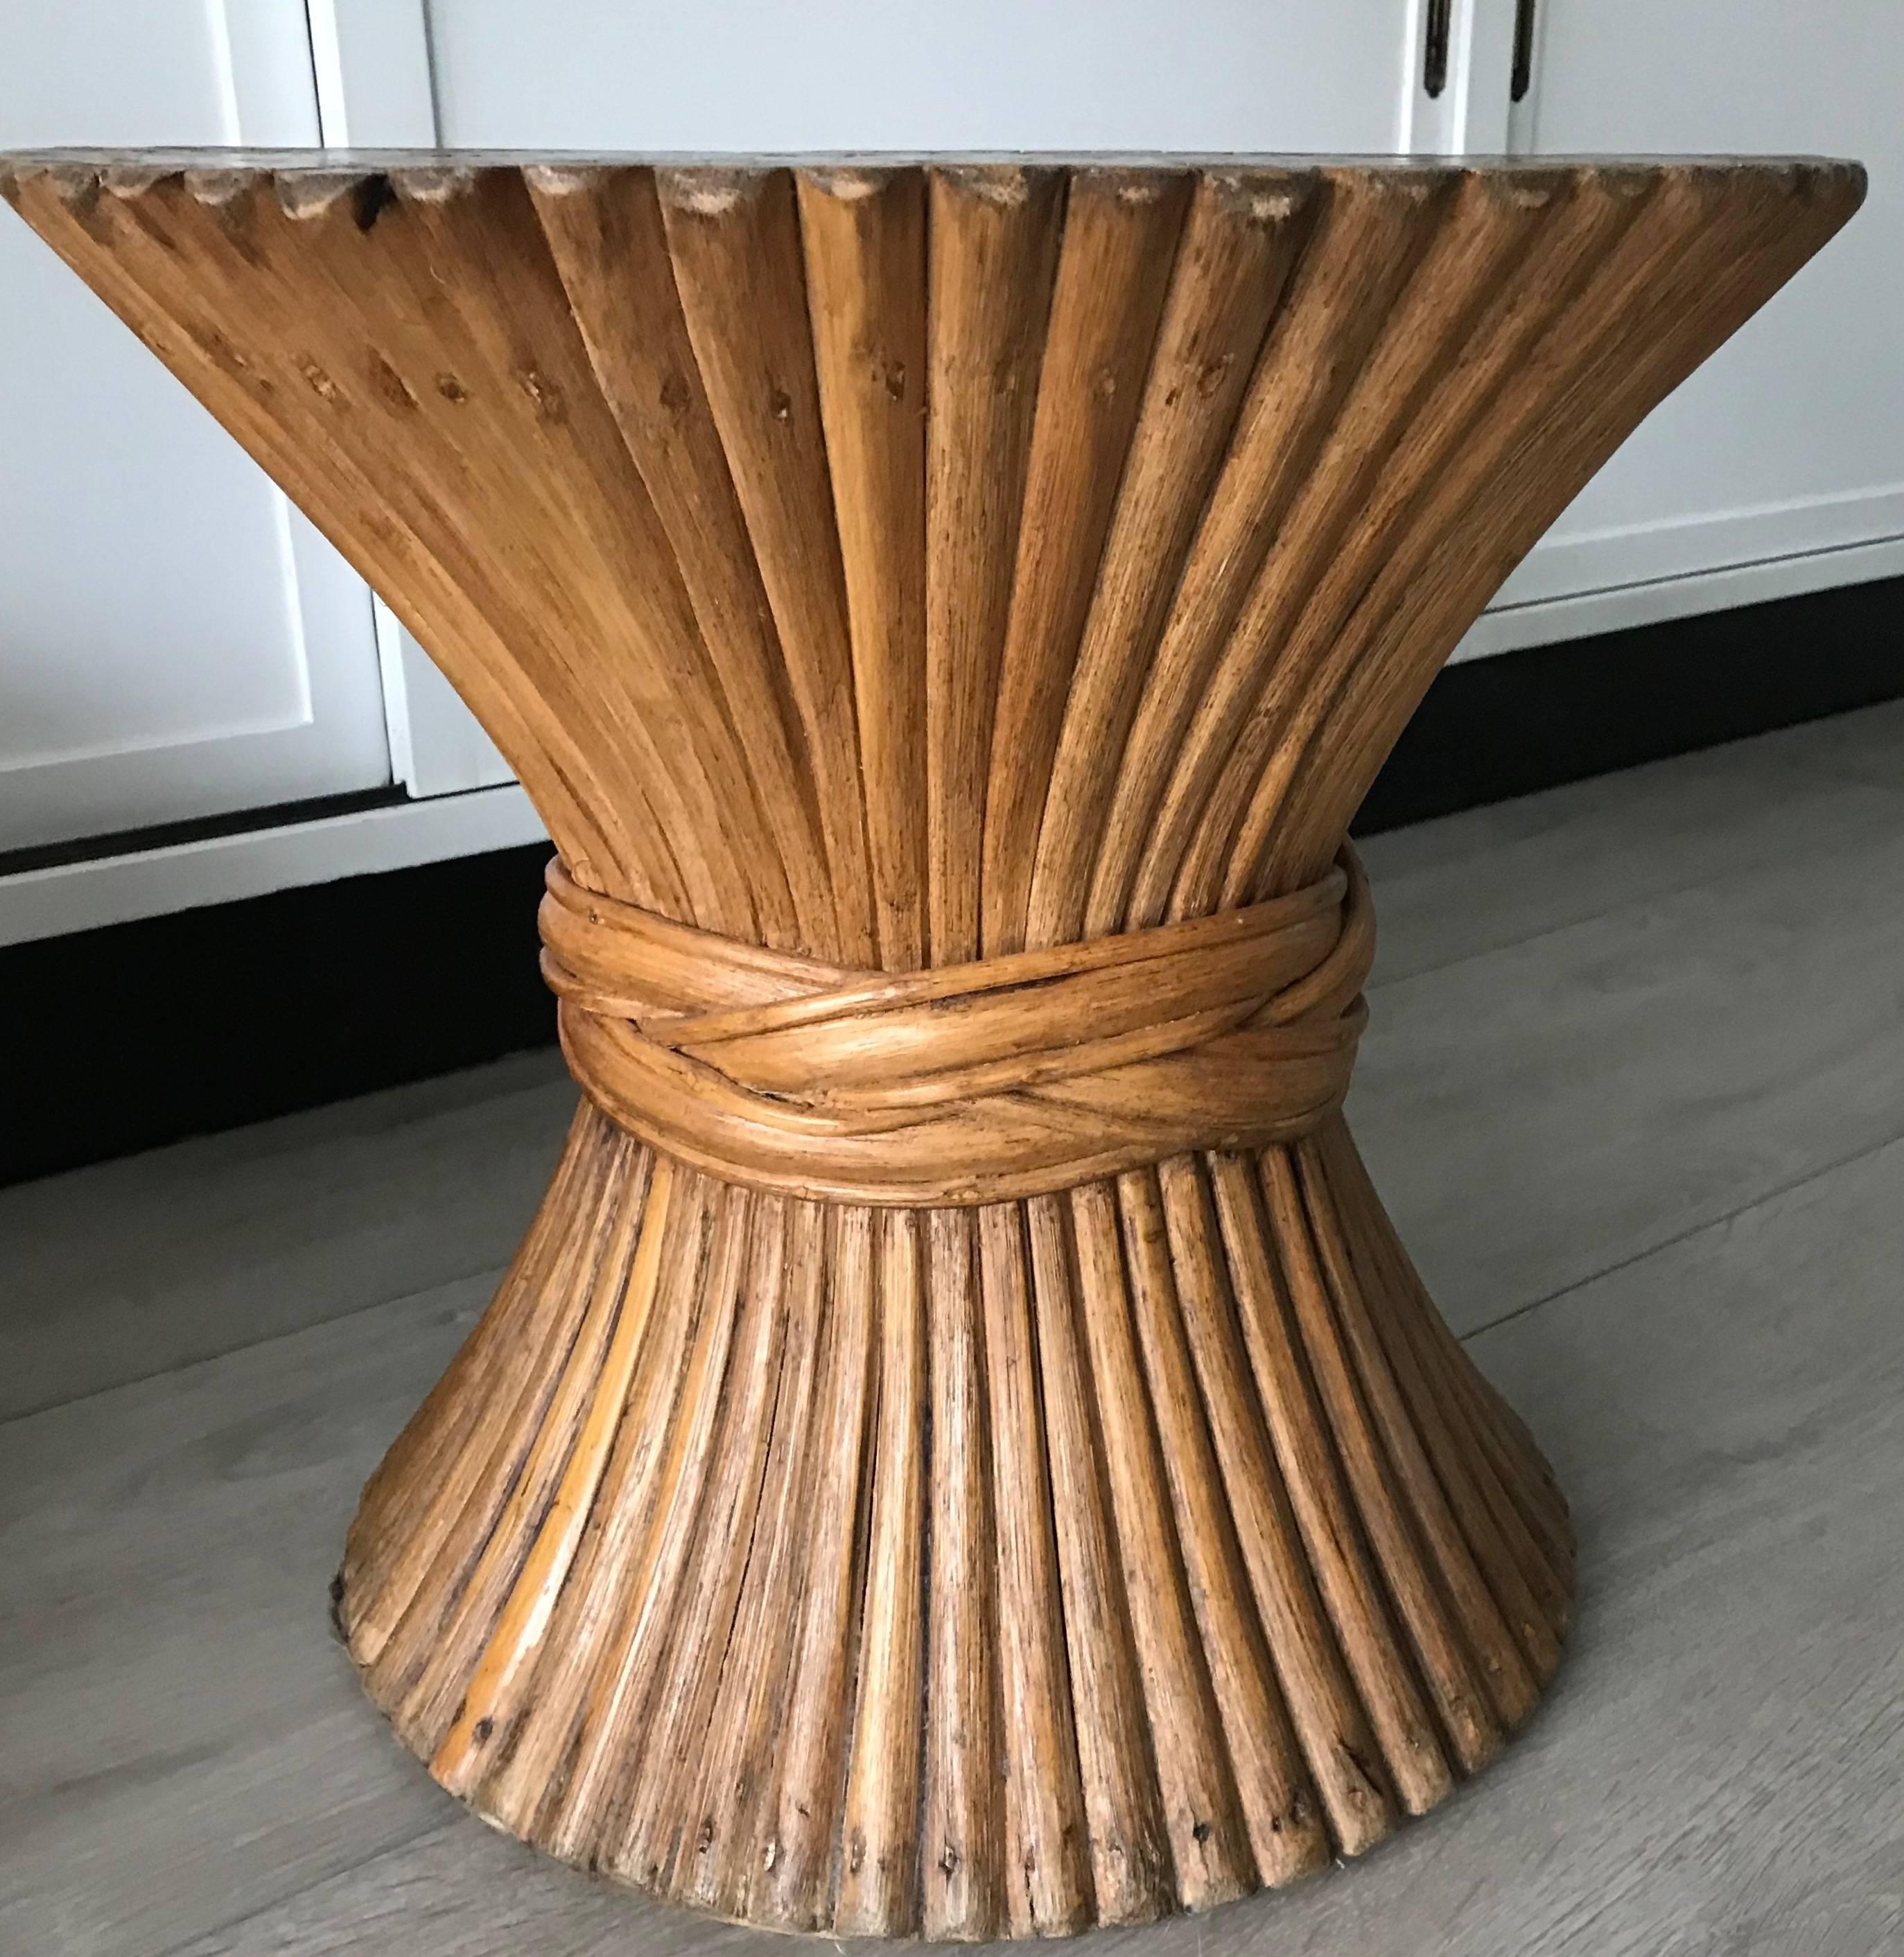 1960s McGuire shaped, sturdy wooden table. 

This decorative and organically stylish table has been cinched into a sheaf of wheat. The wooden shafts are stylishly encircled by a decorative rattan tie. This handcrafted, American piece of furniture